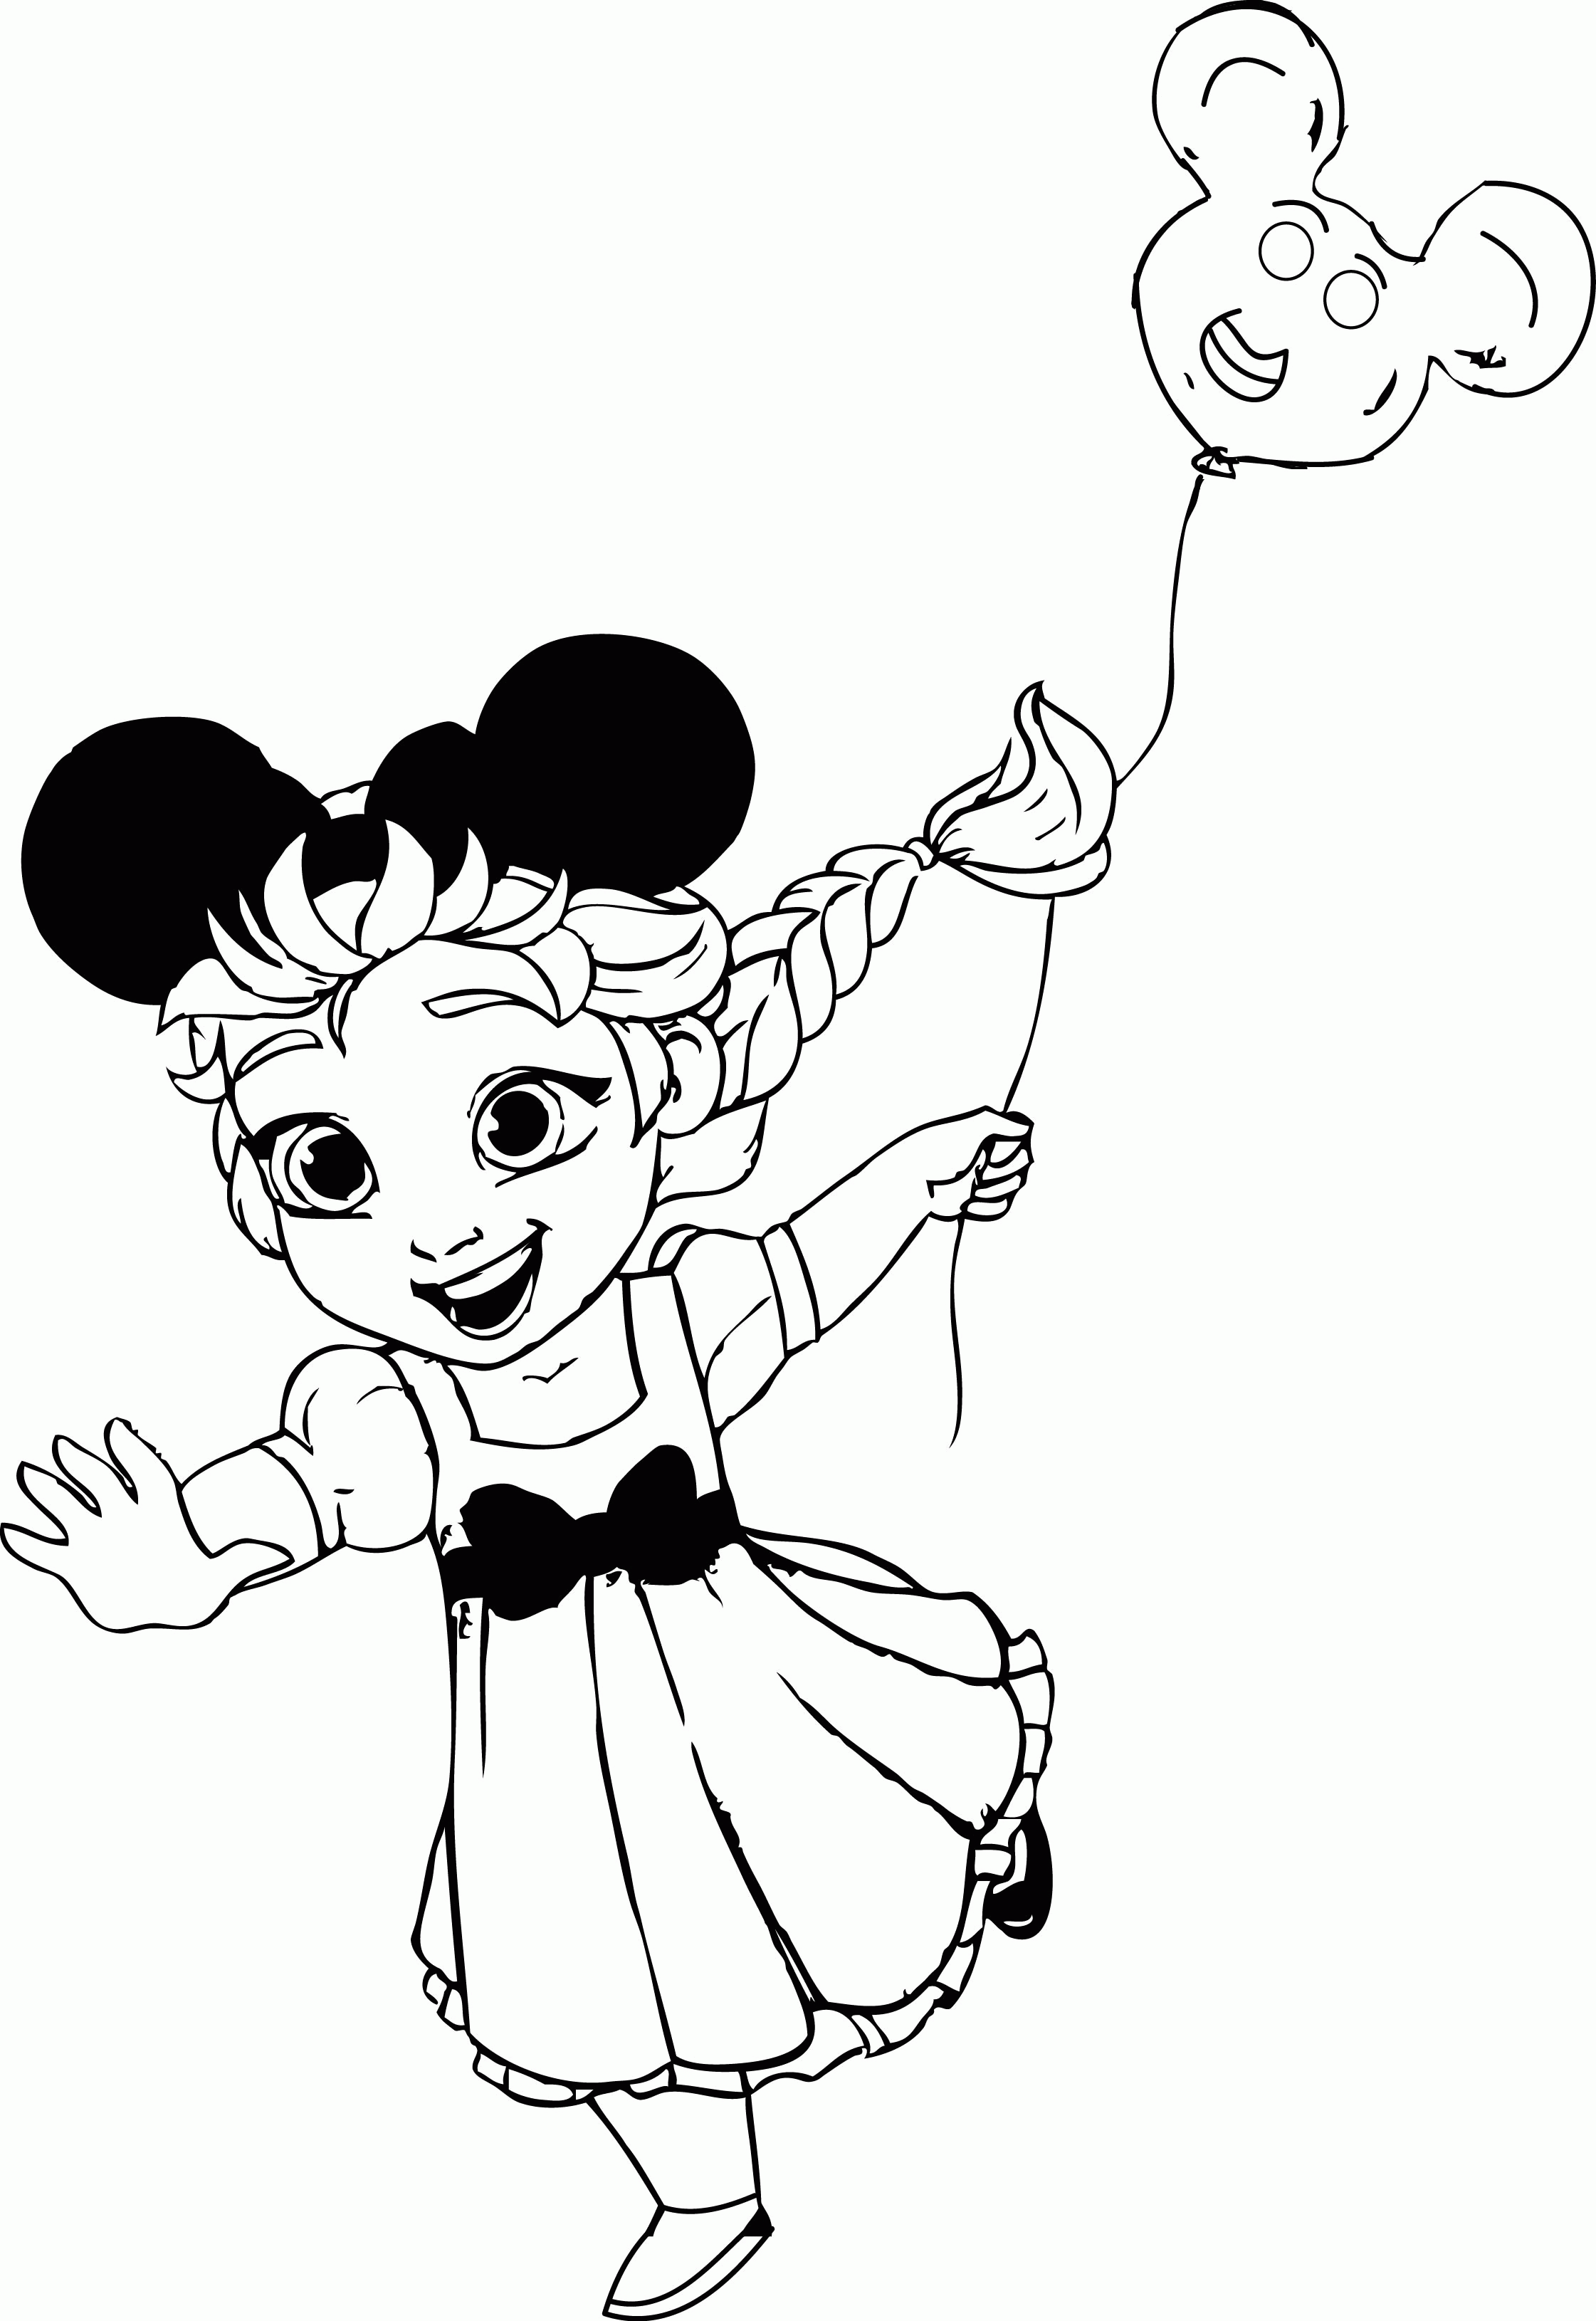 Disneyland - Coloring Pages for Kids and for Adults